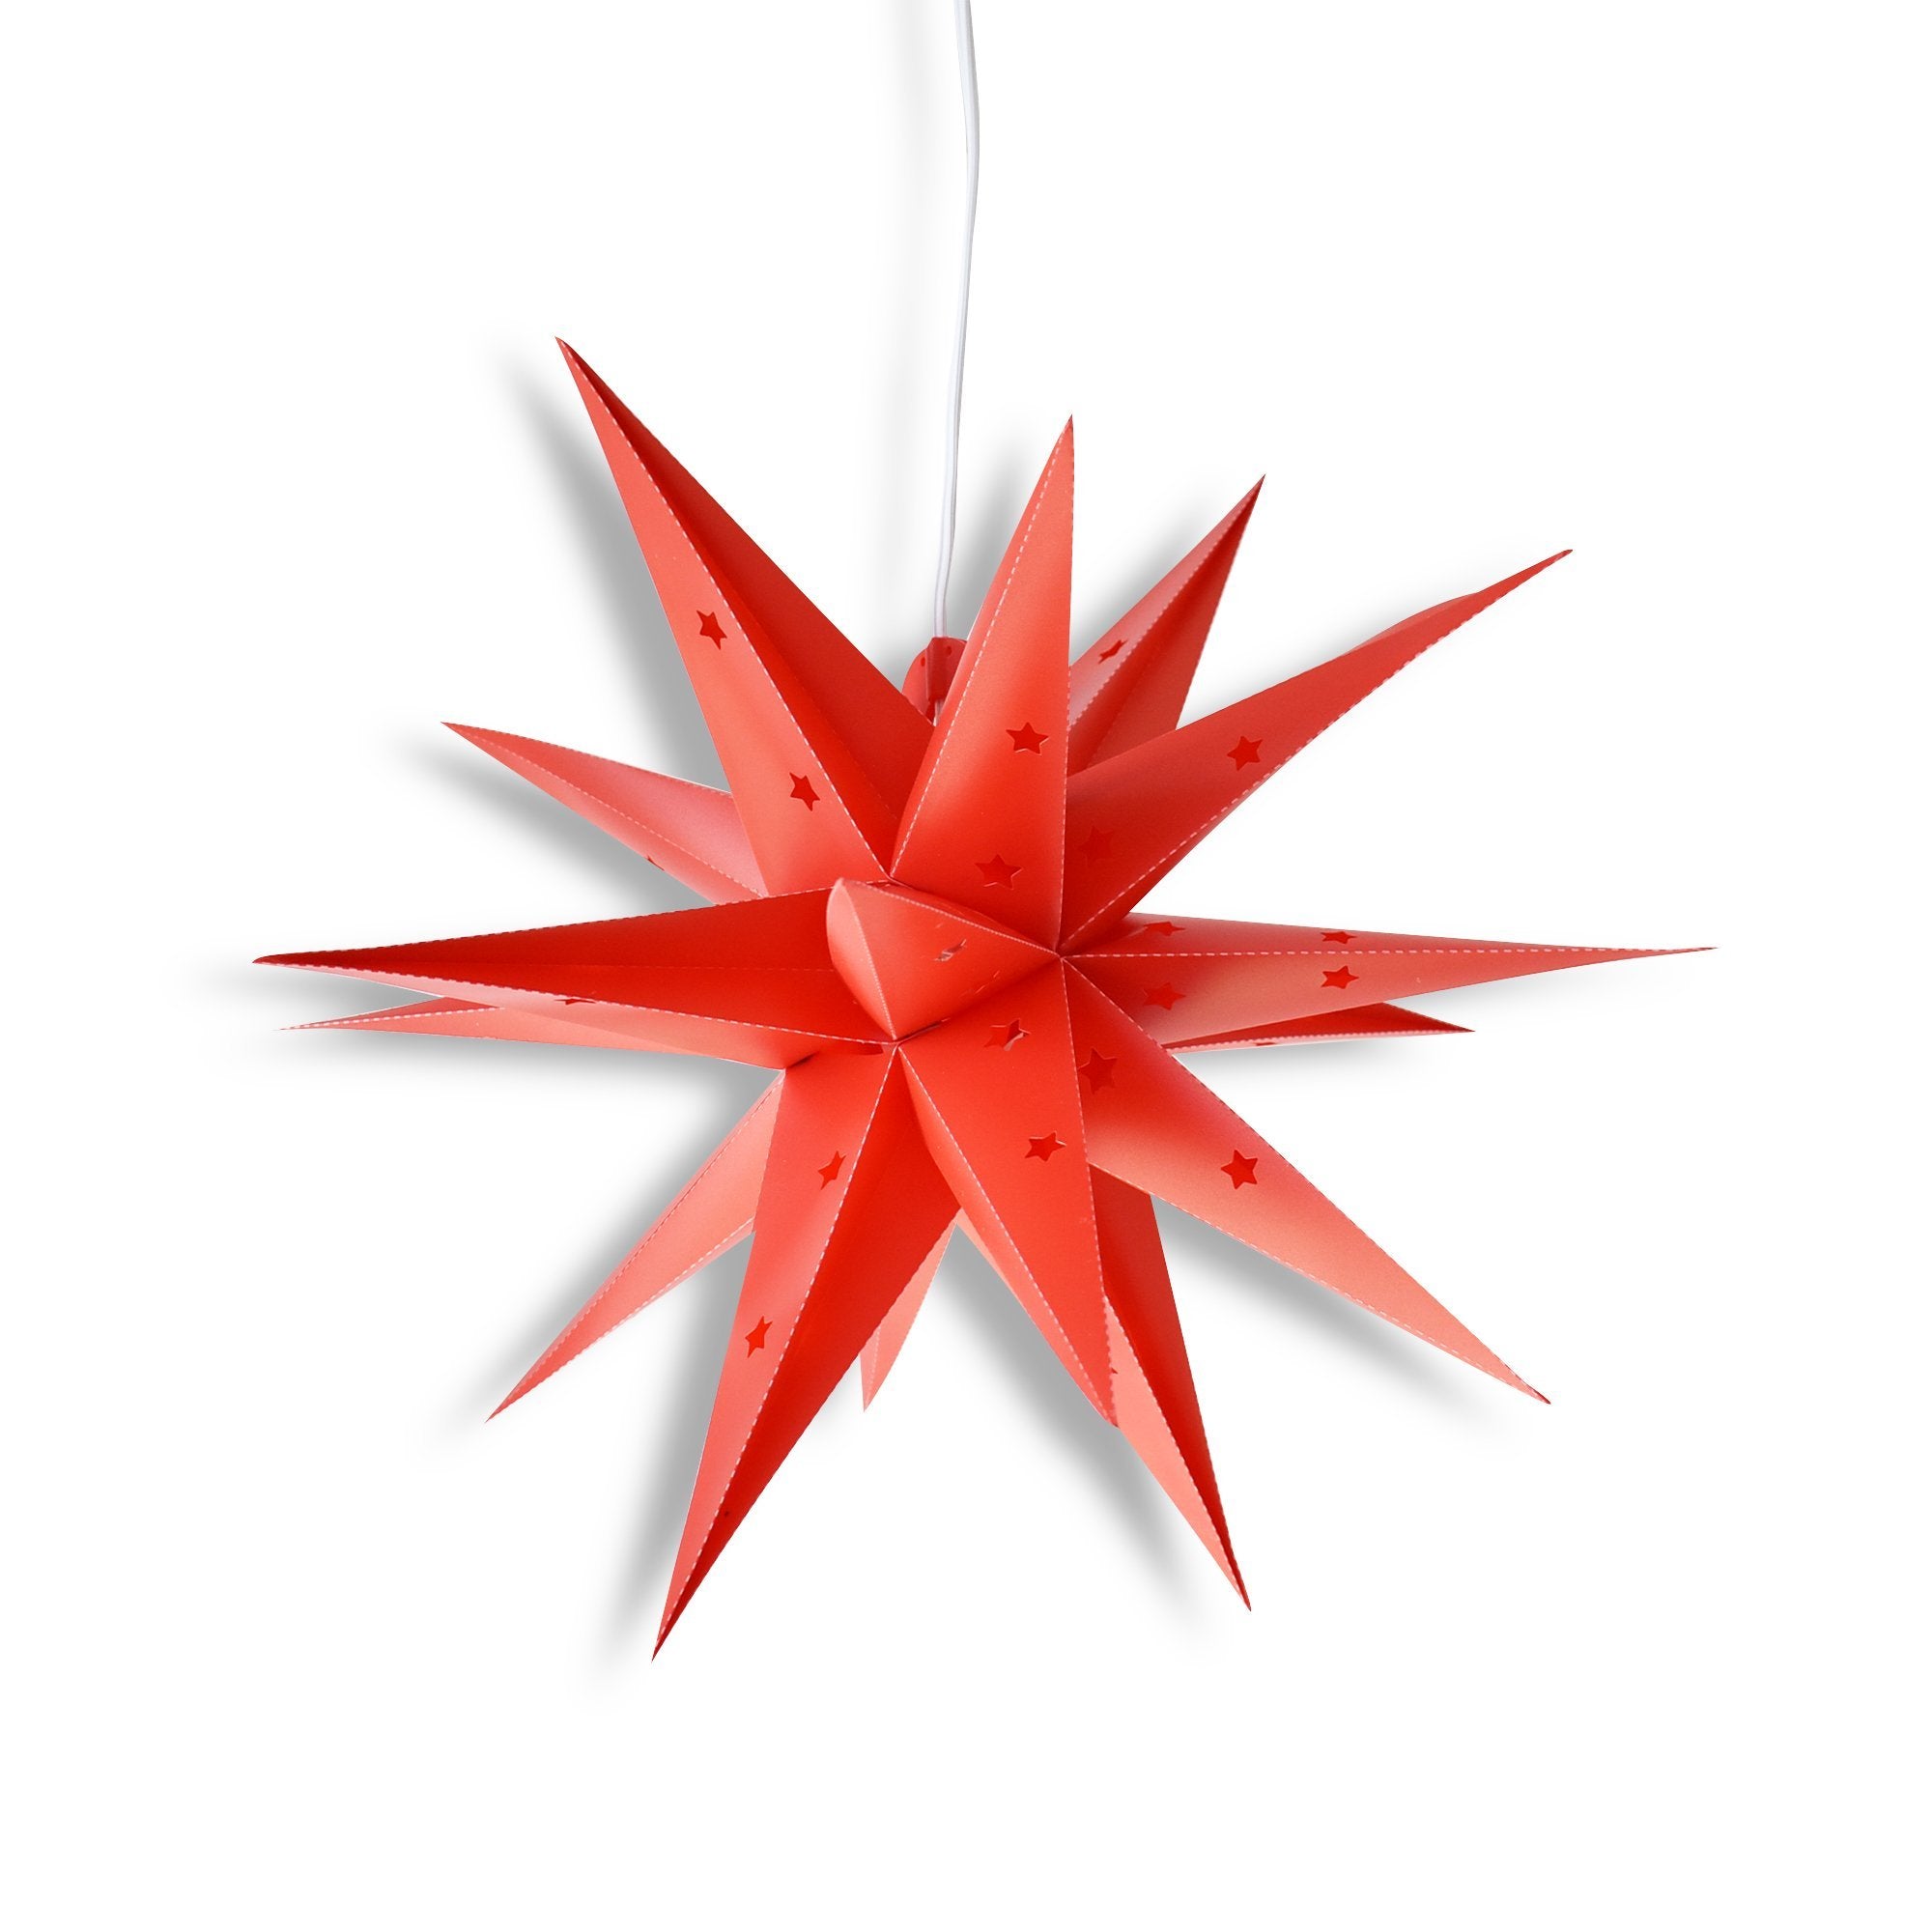 20" Red Moravian Weatherproof Star Lantern Lamp, Multi-Point Hanging Decoration (Shade Only)